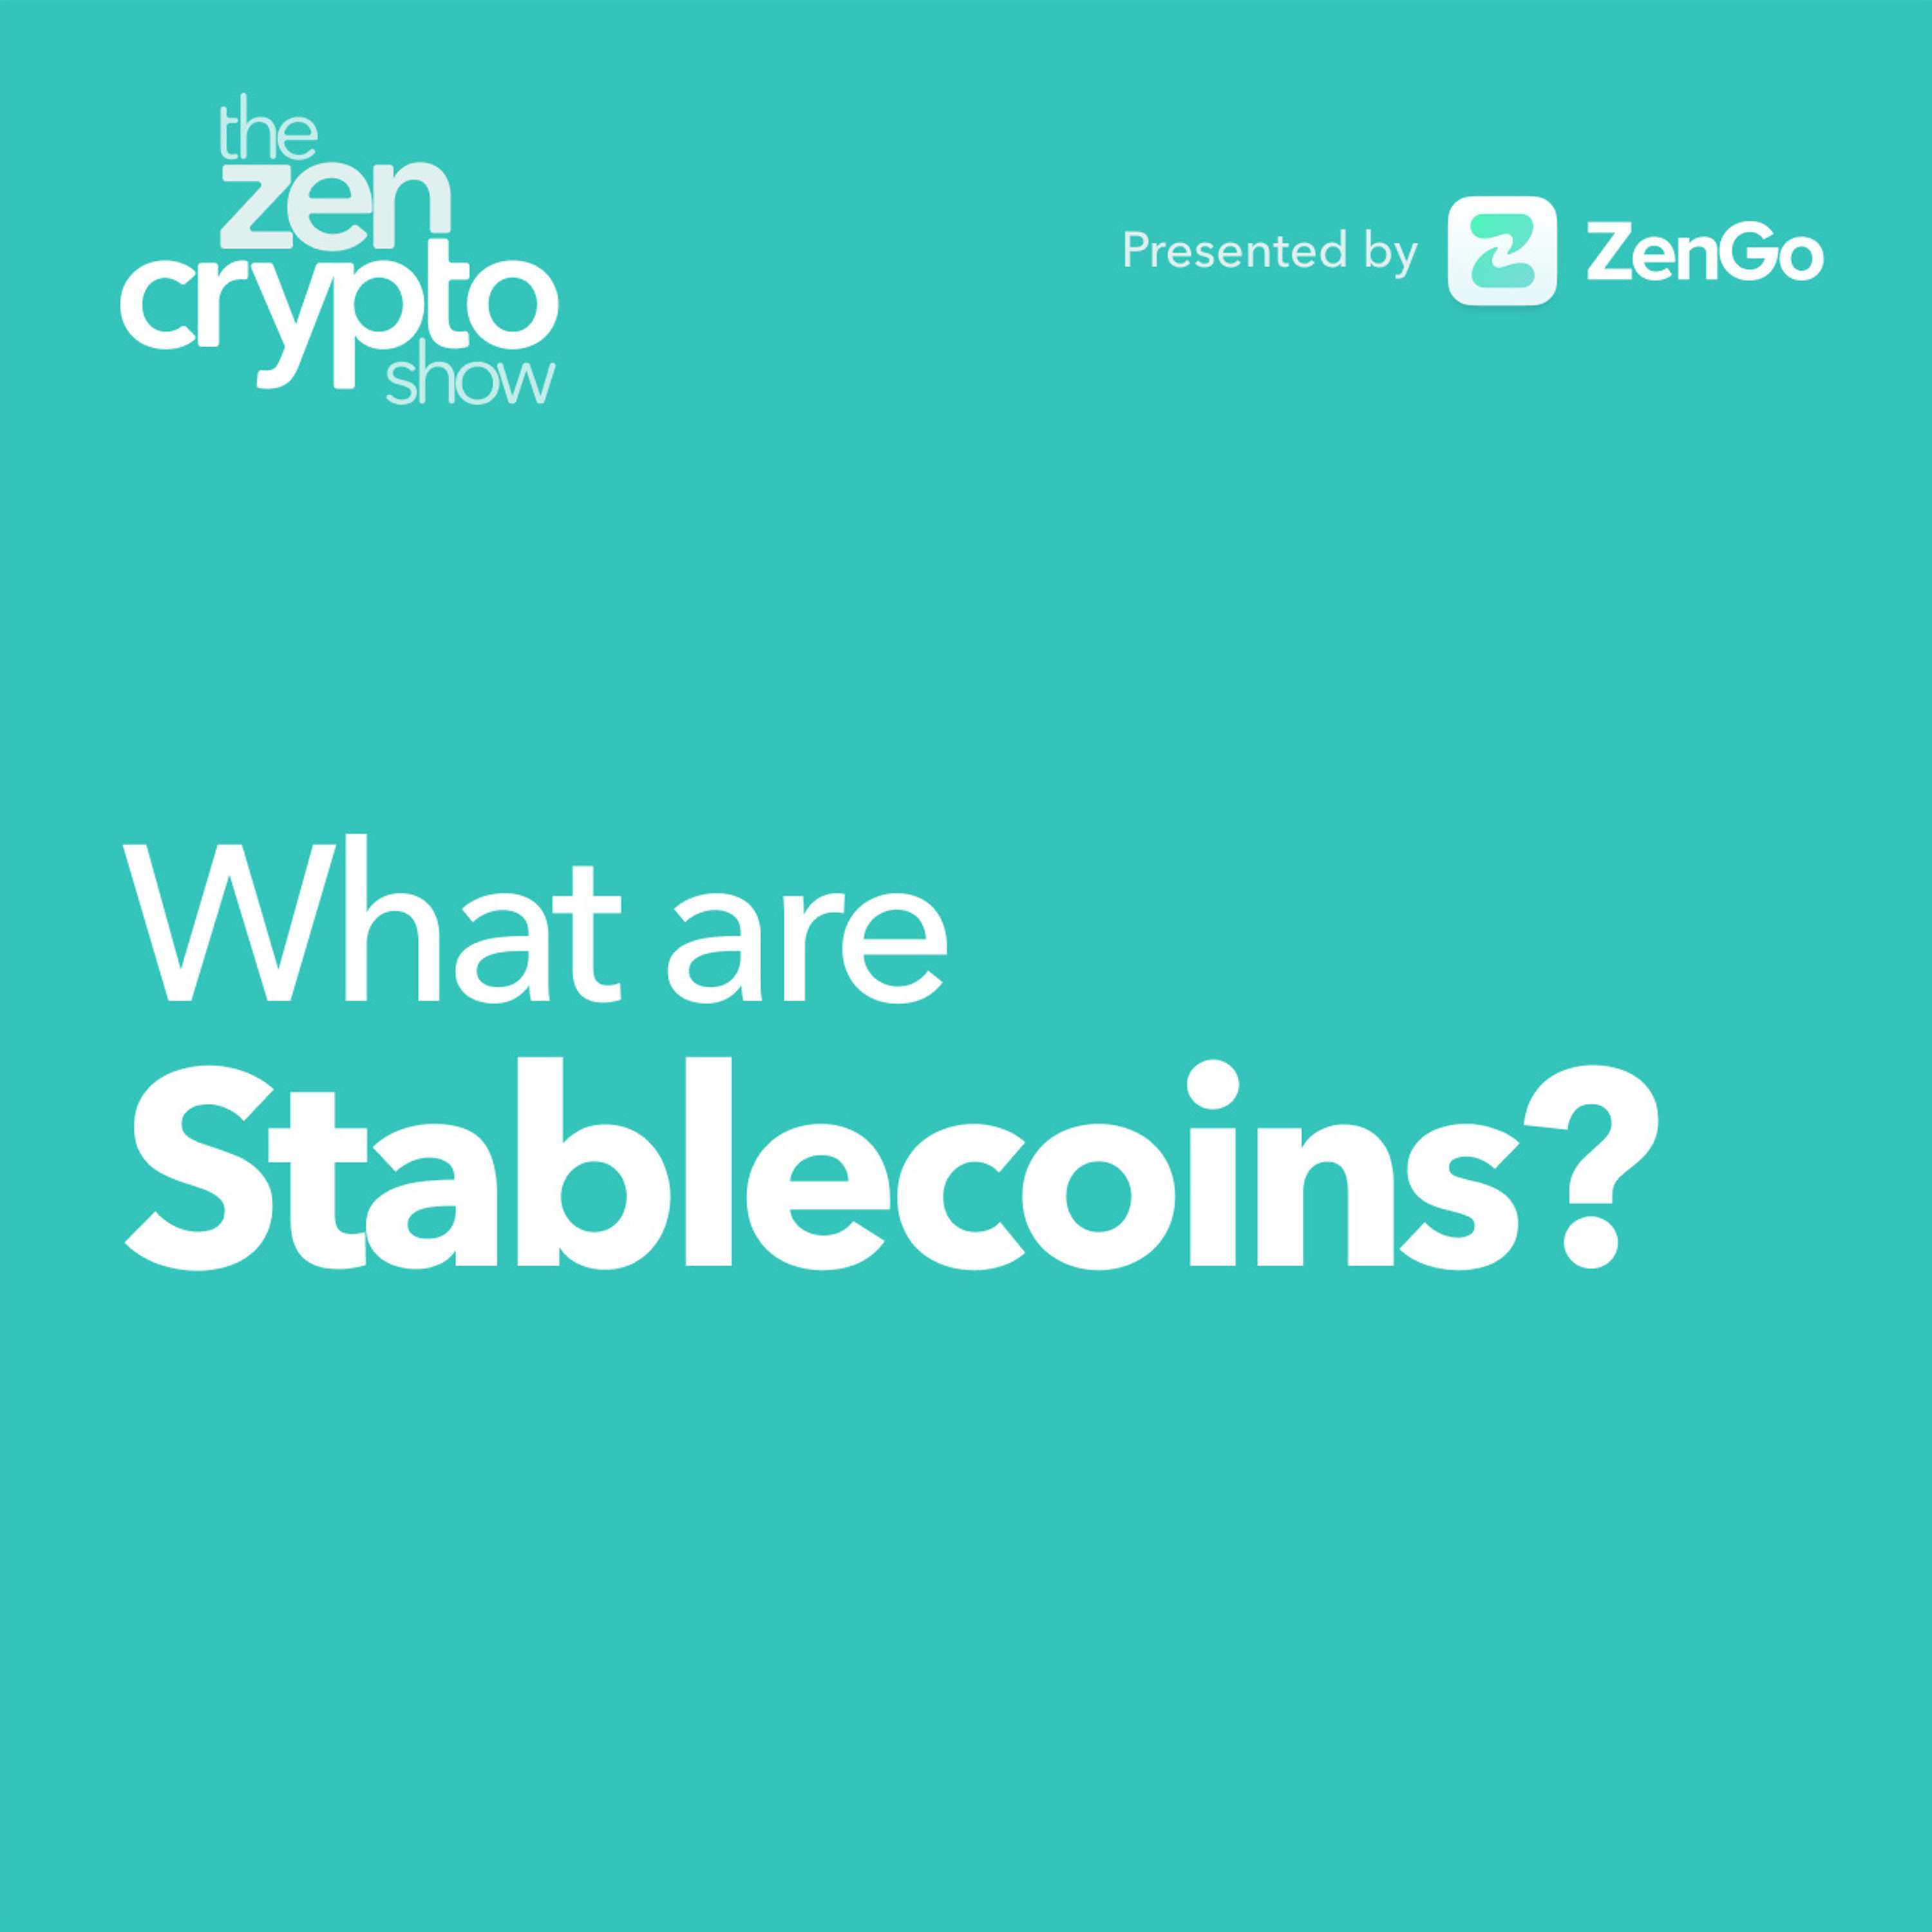 What are stablecoins?